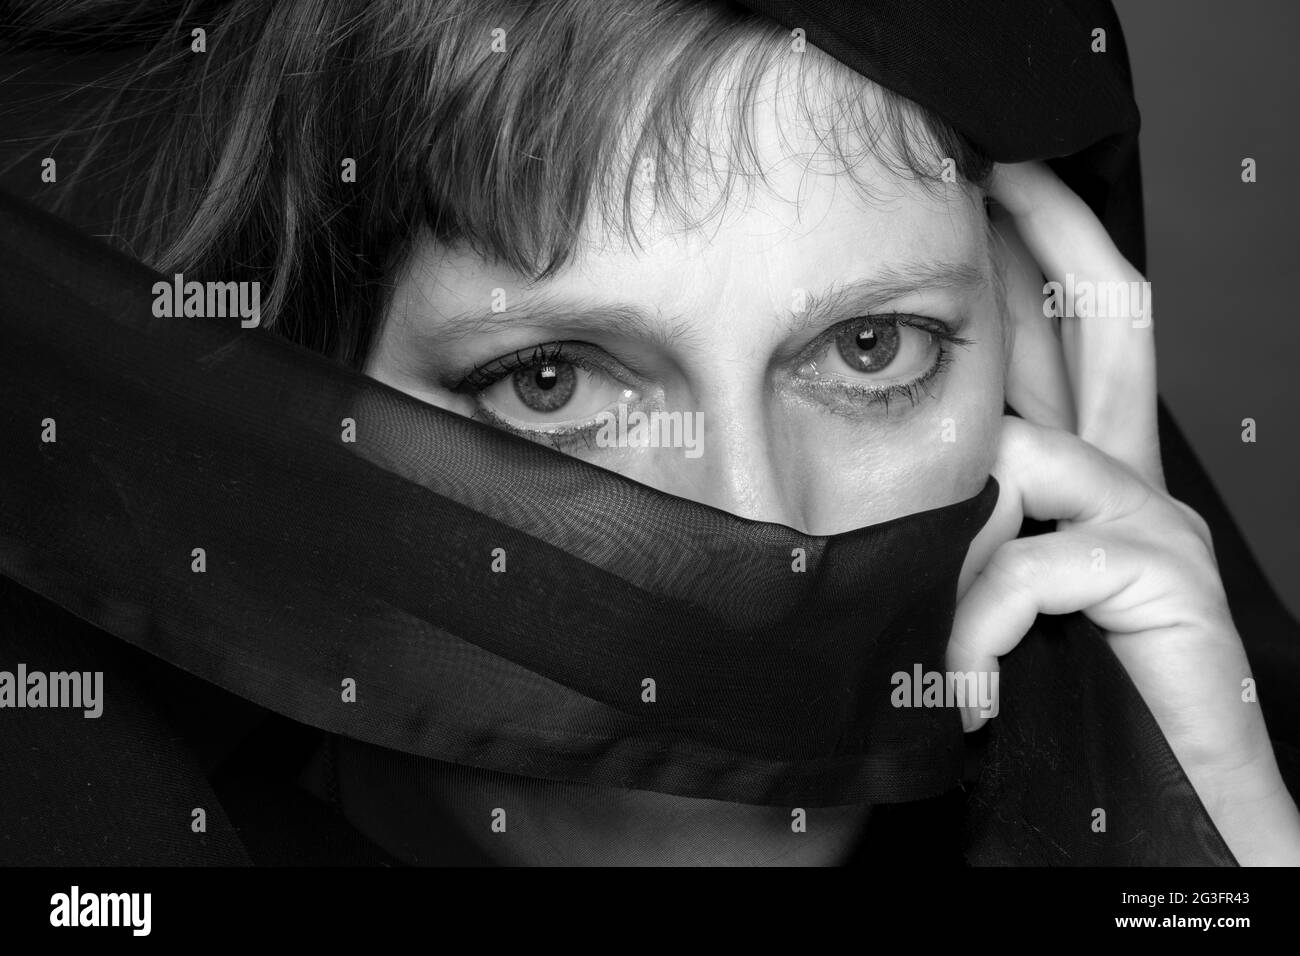 Woman with face covering Stock Photo